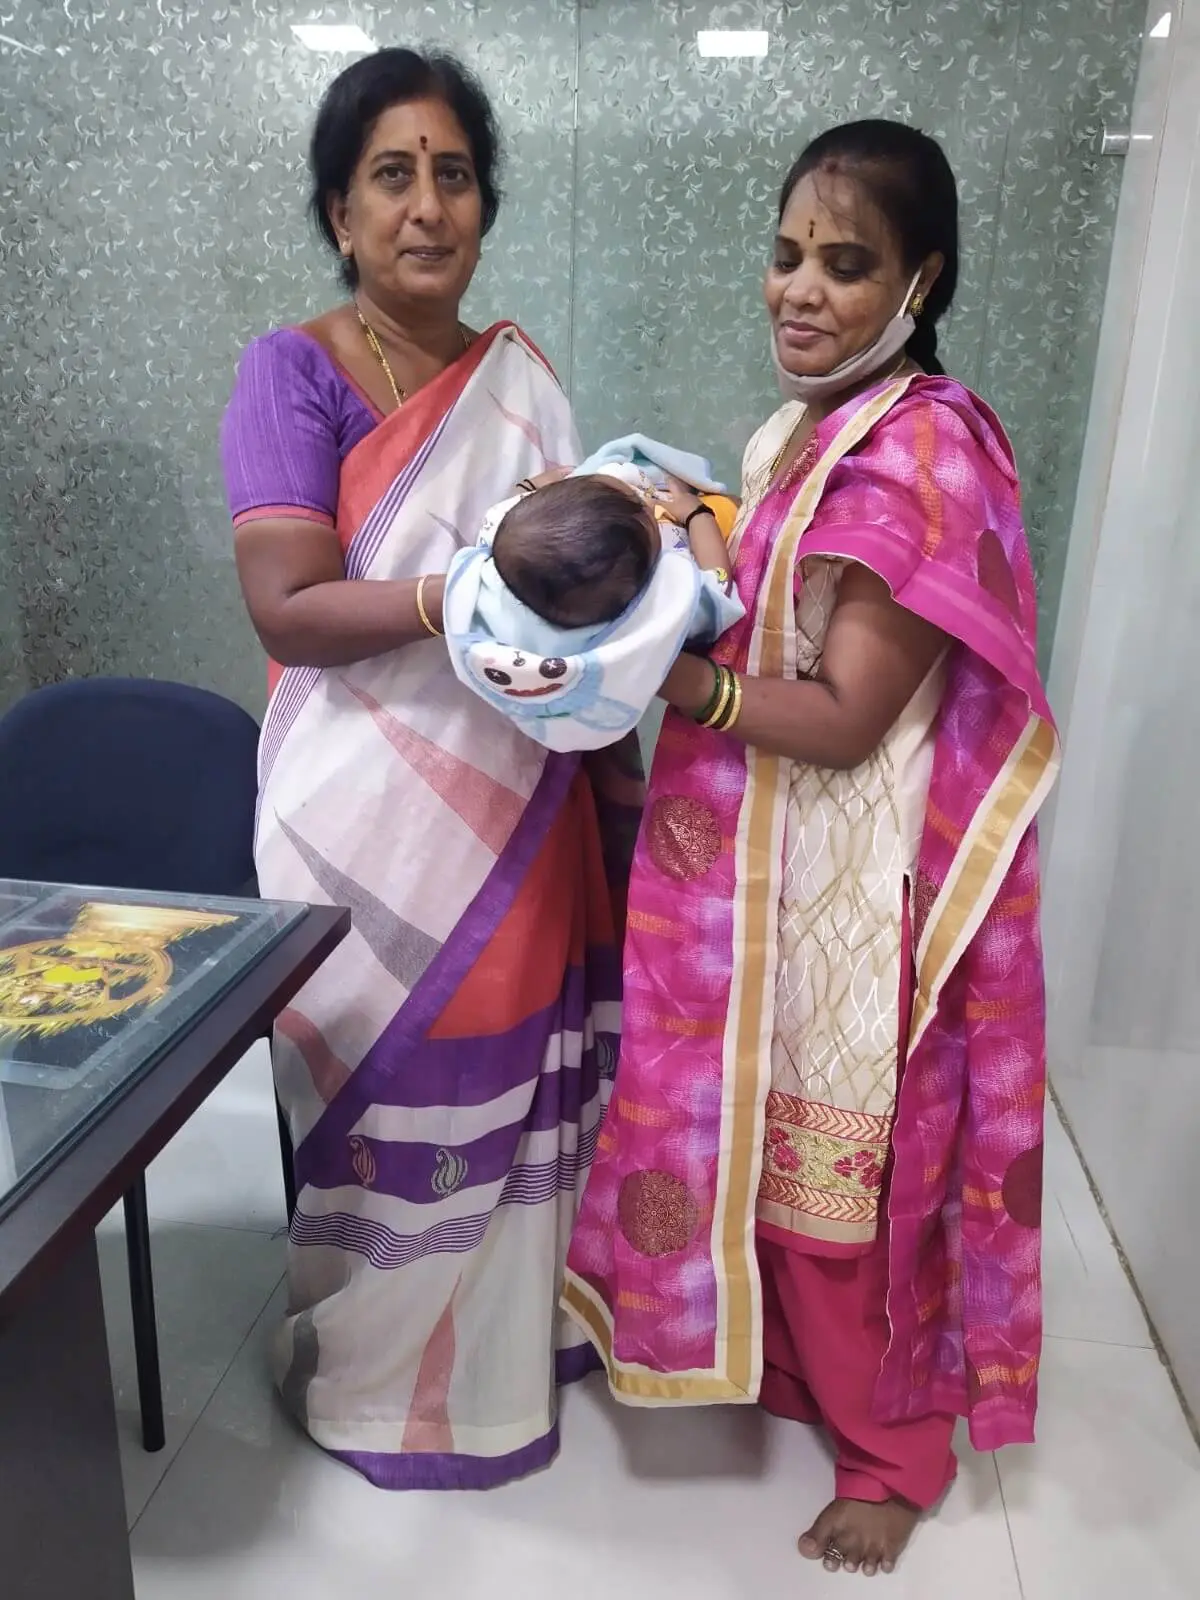 Dr. Rama Devi Kolli (L), standing and holding an infant, along with the mother (R), against the backdrop of glass doors, in a consultation room at Karthika Datta's IVF.